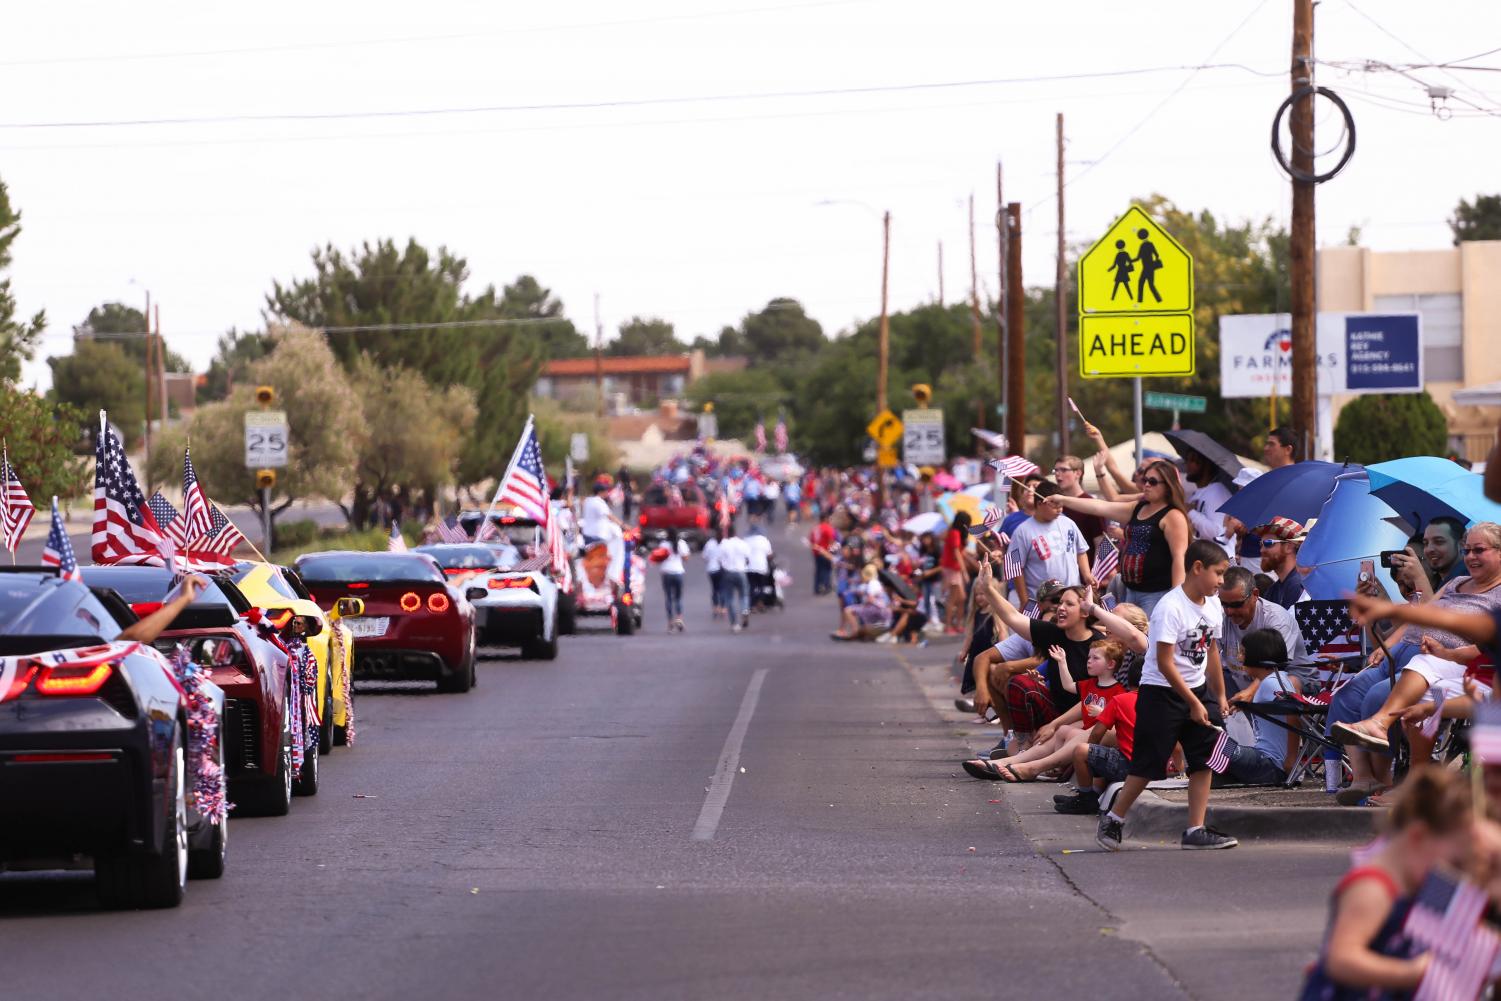 38th Annual 4th of July People’s Parade at Eastside El Paso The